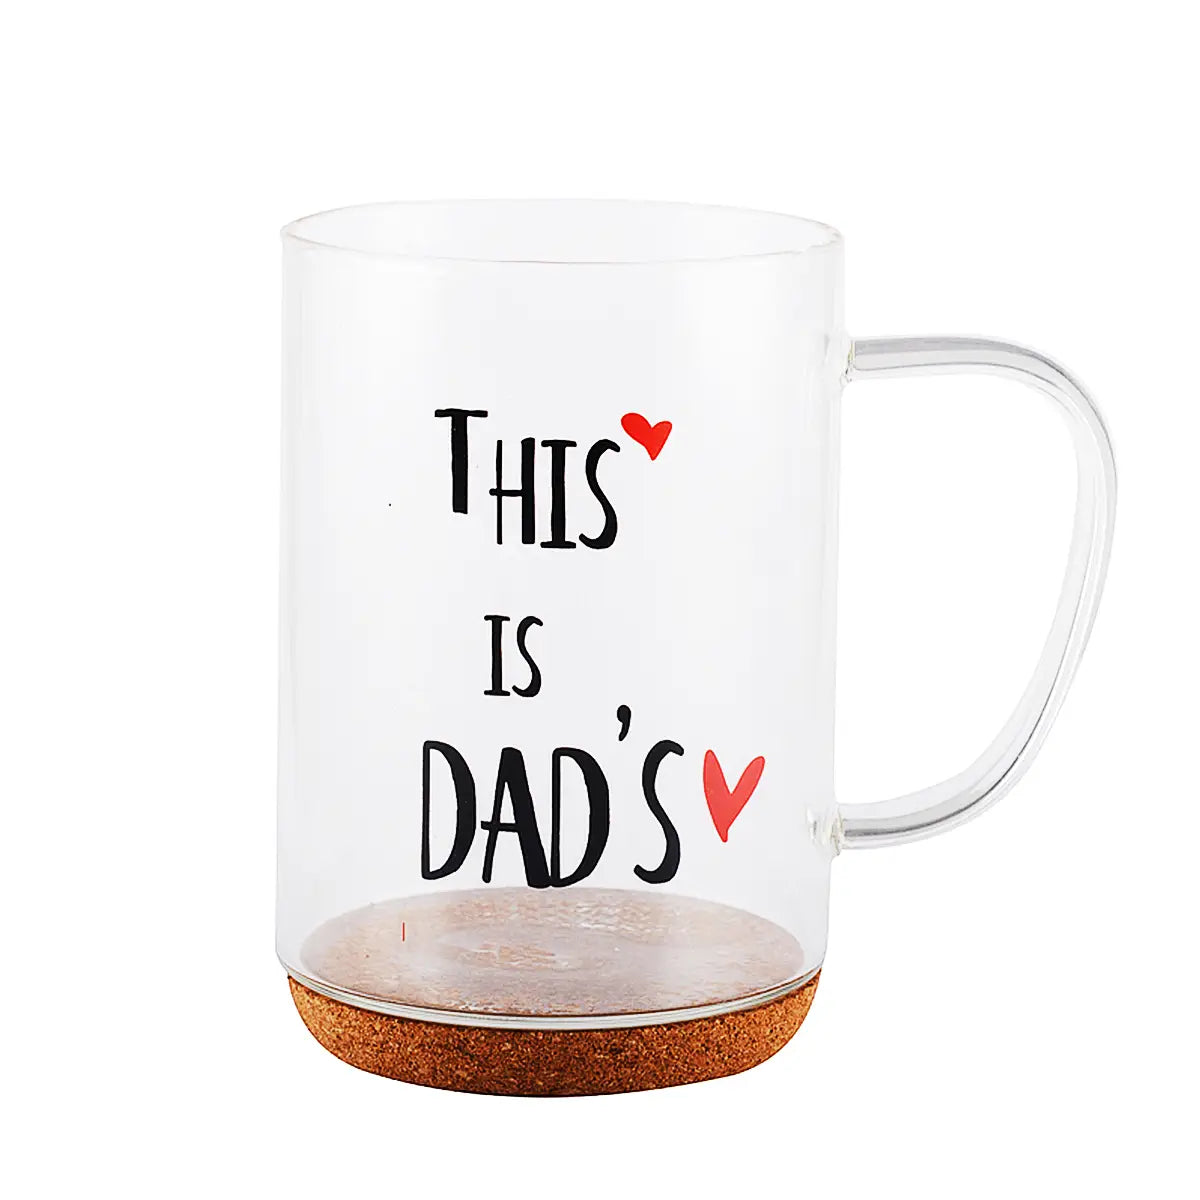 Glass Mug with Cork "This Is Dad's"